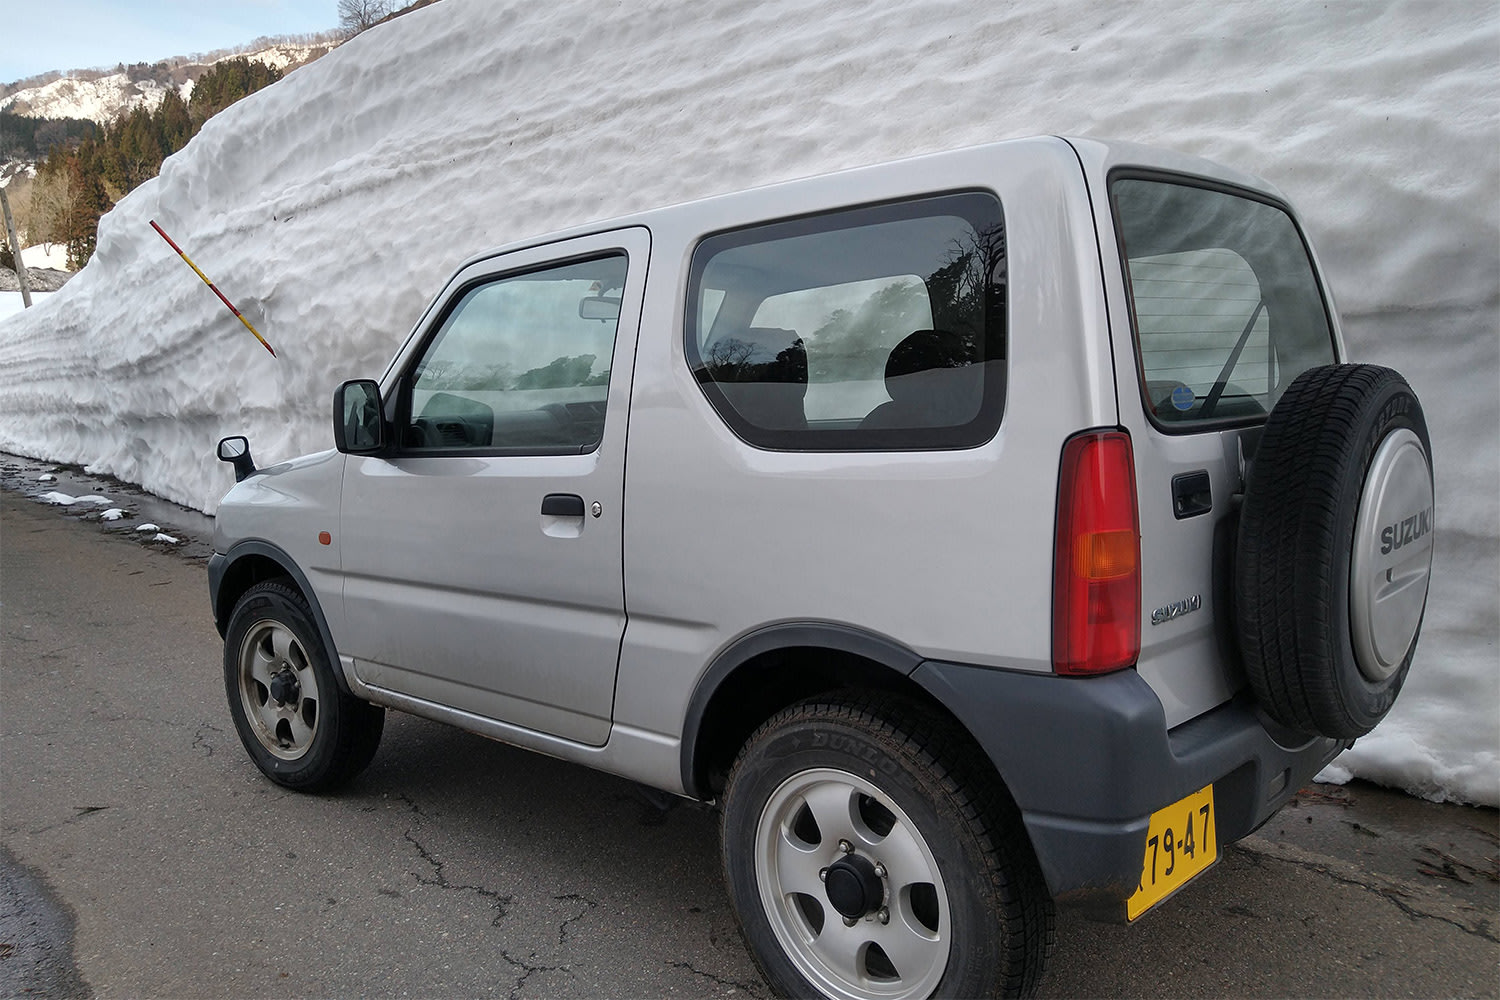 A Japanese compact car is surrounded by walls of snow that are taller than the car